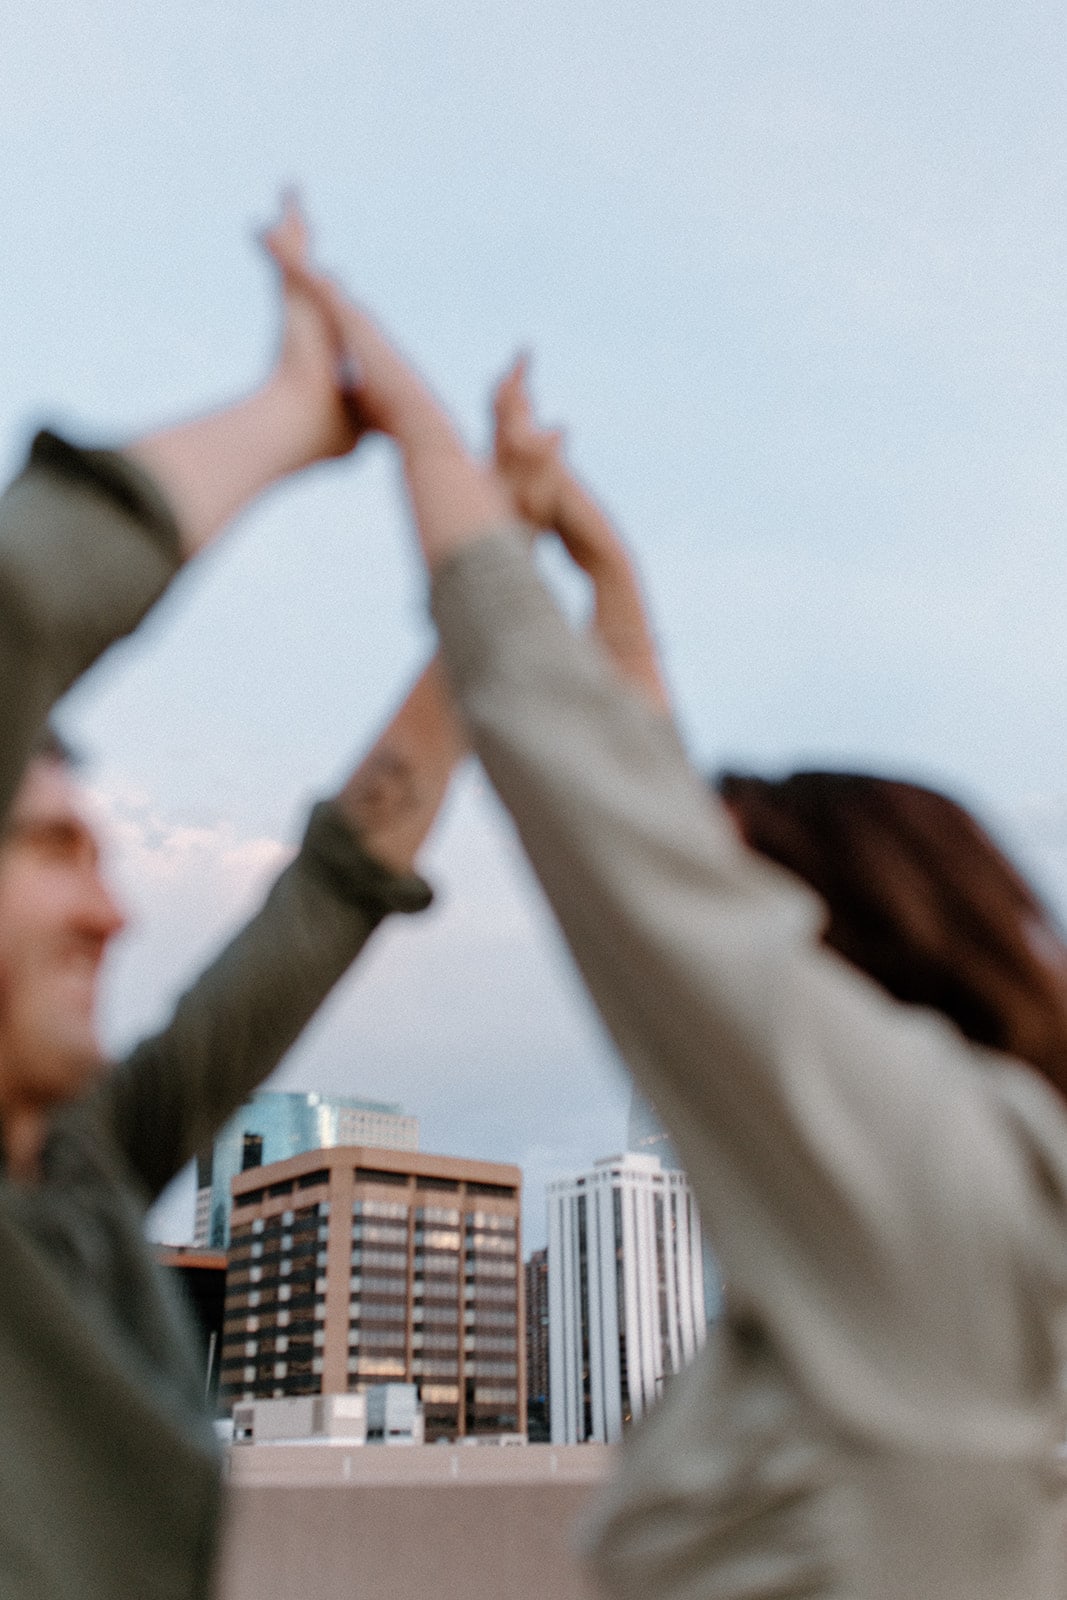 A Picnic + Downtown Engagement Photos in Denver, CO